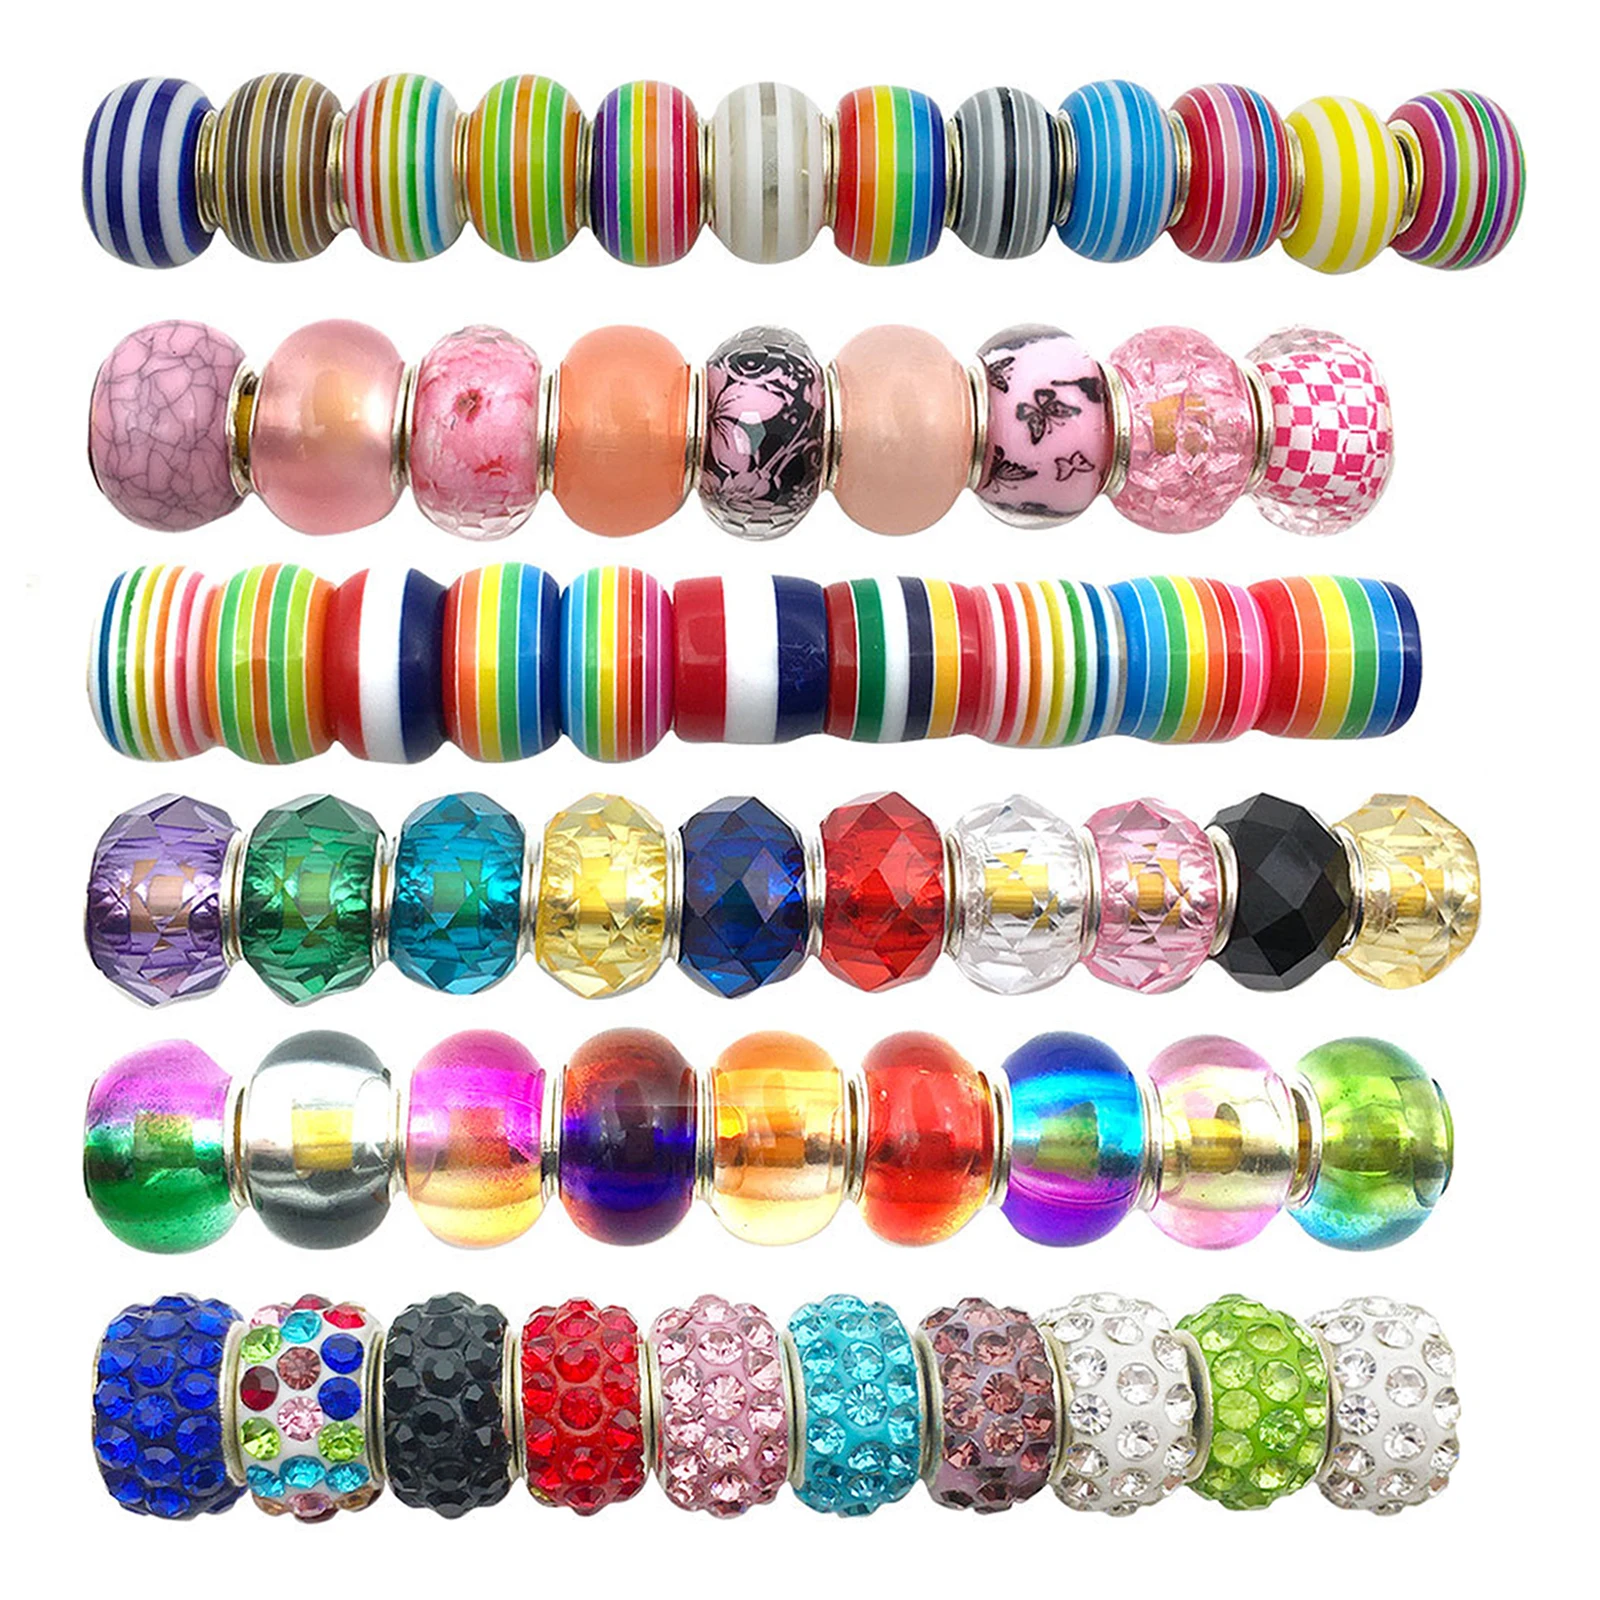 60 PCS Girls Mixed Color Charm DIY Beads Gems Kids String Bead Bracelet Necklace Making Crafts Kit Accessories 5mm